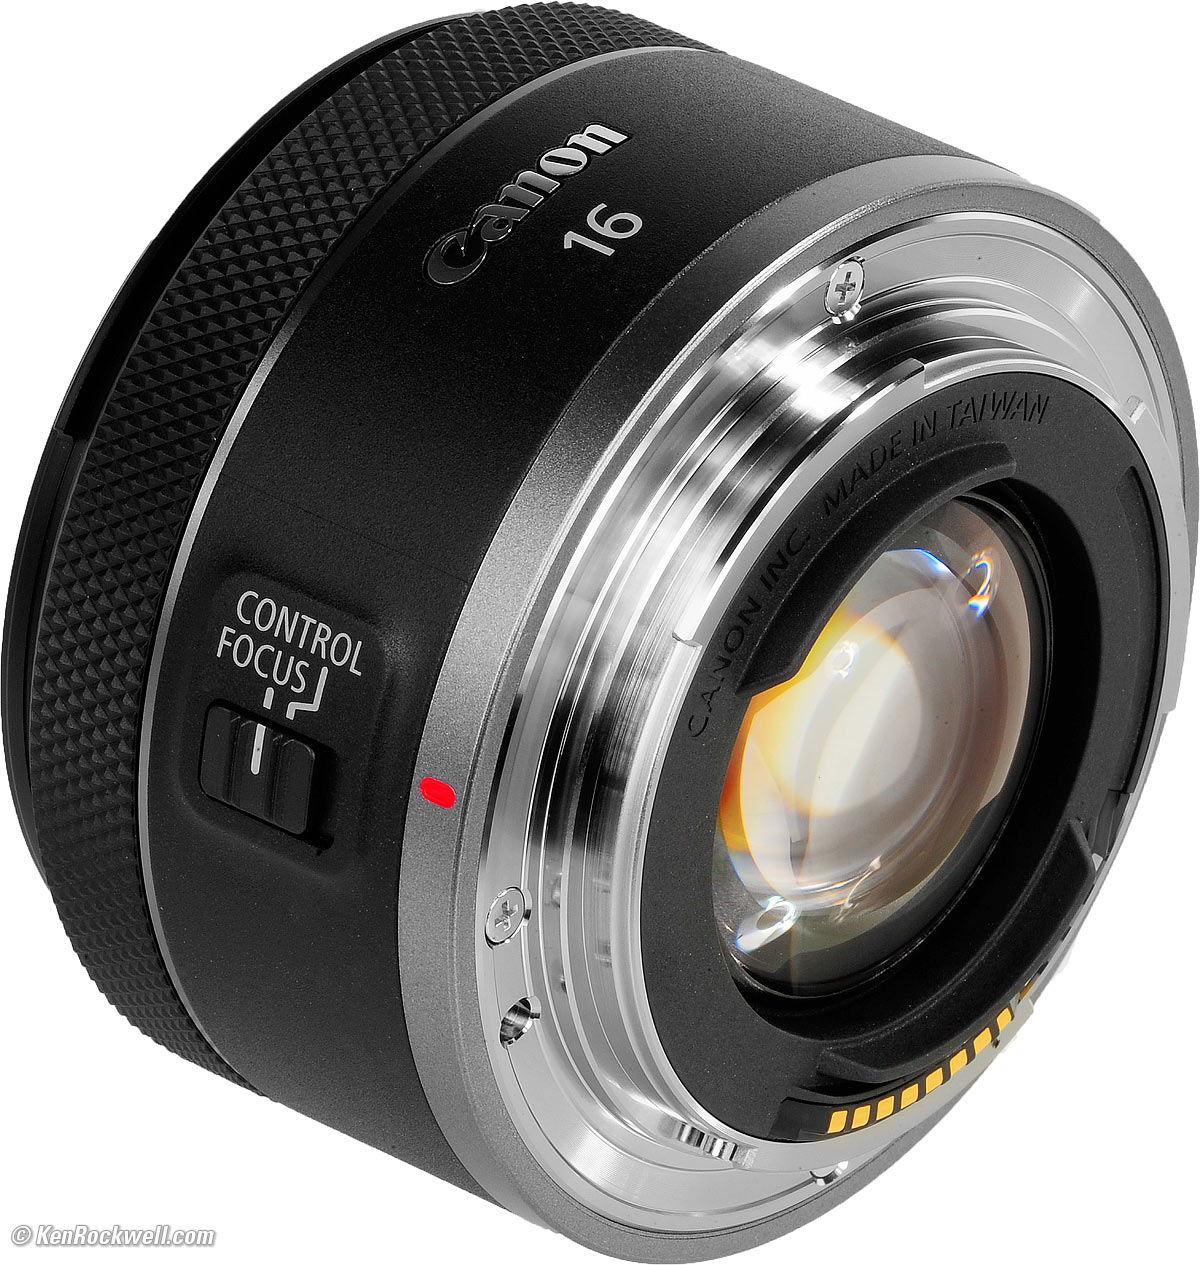 Canon RF 16mm f/2.8 STM Review